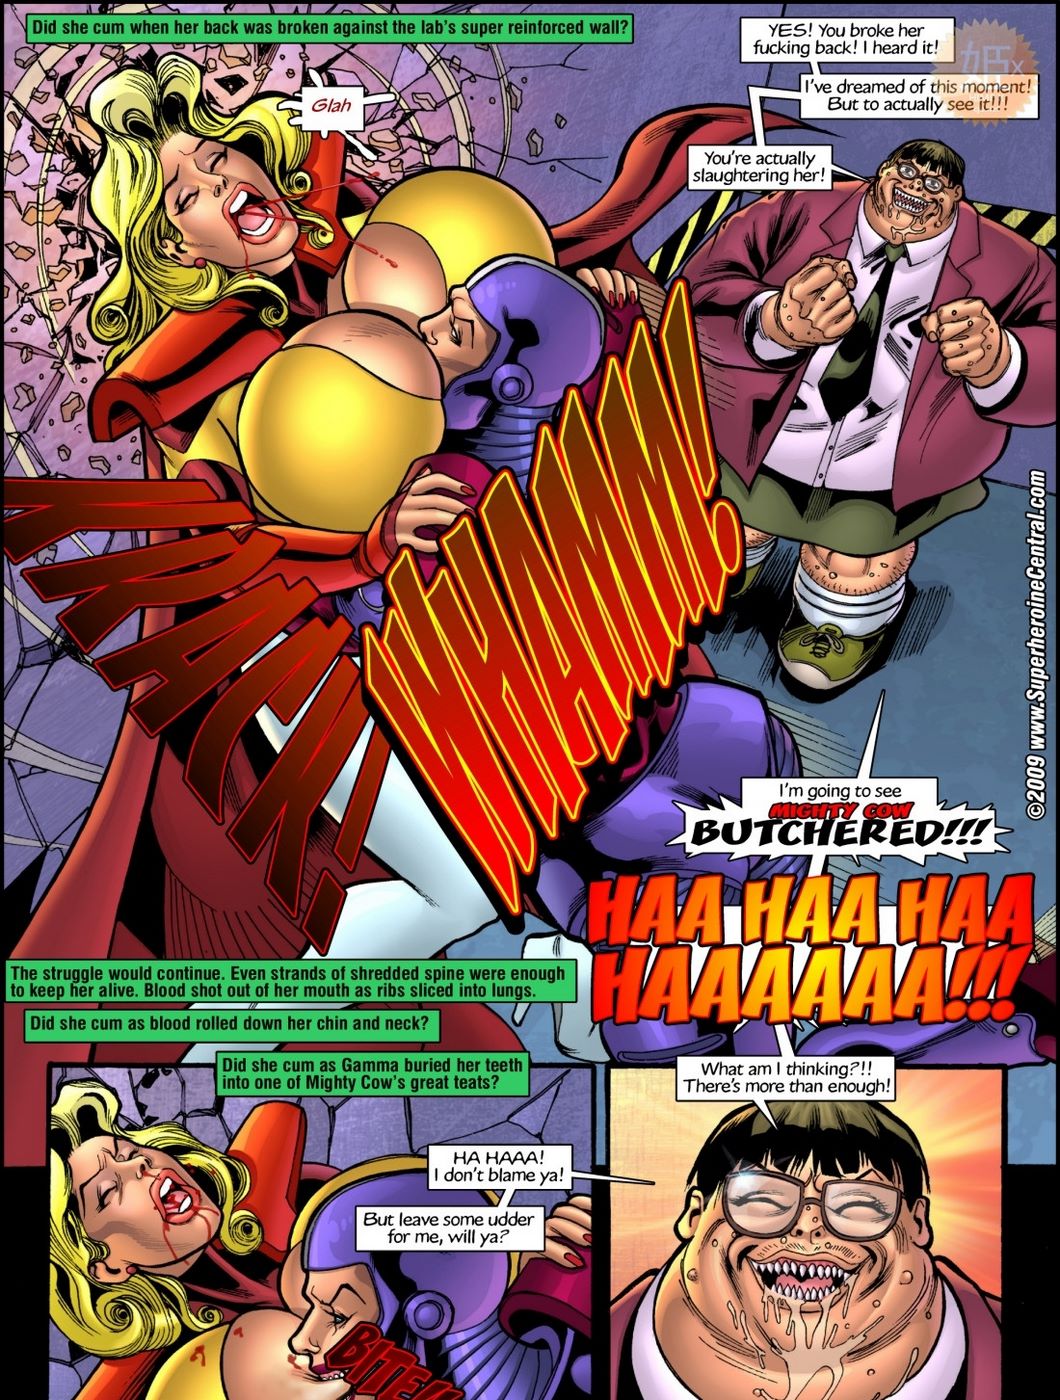 Superheroine Central- Mighty cow - part 3